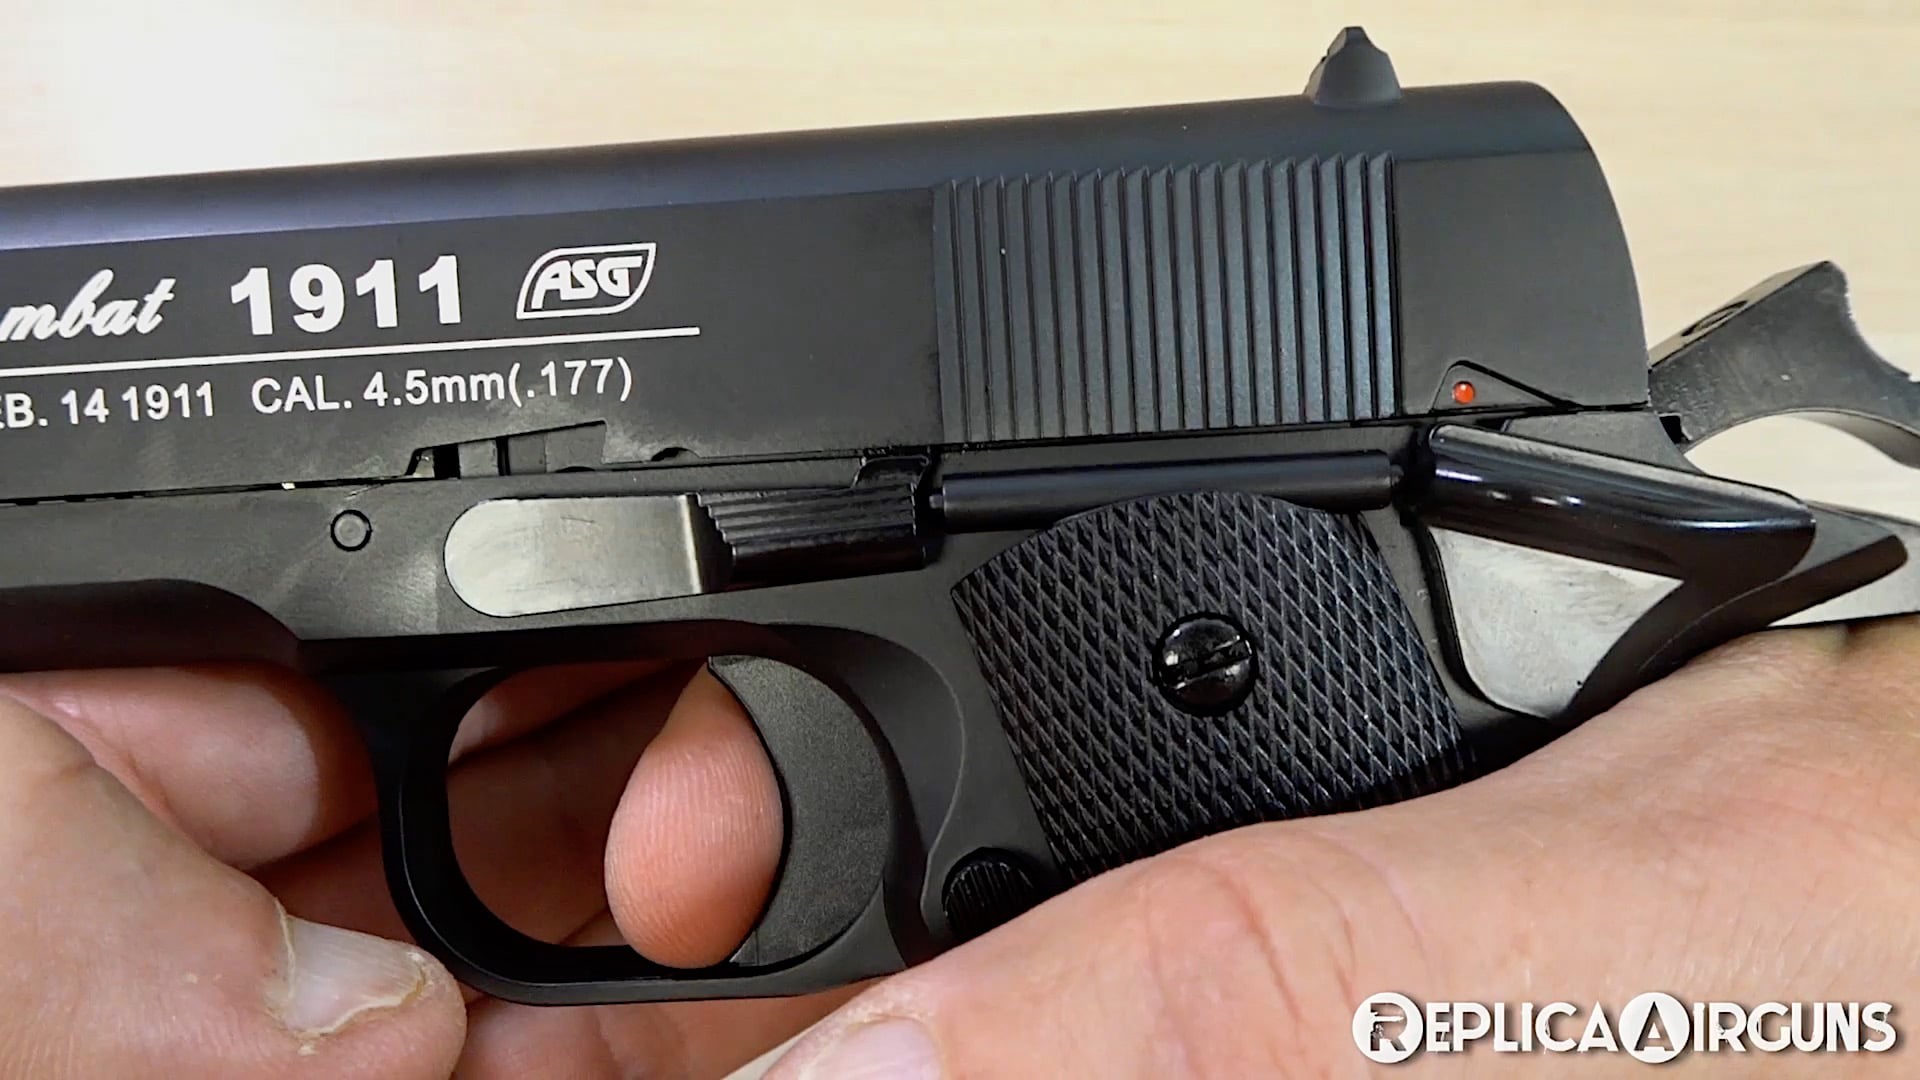 ASG 1911 US-C CO2 Blowback BB Pistol Table Top Review